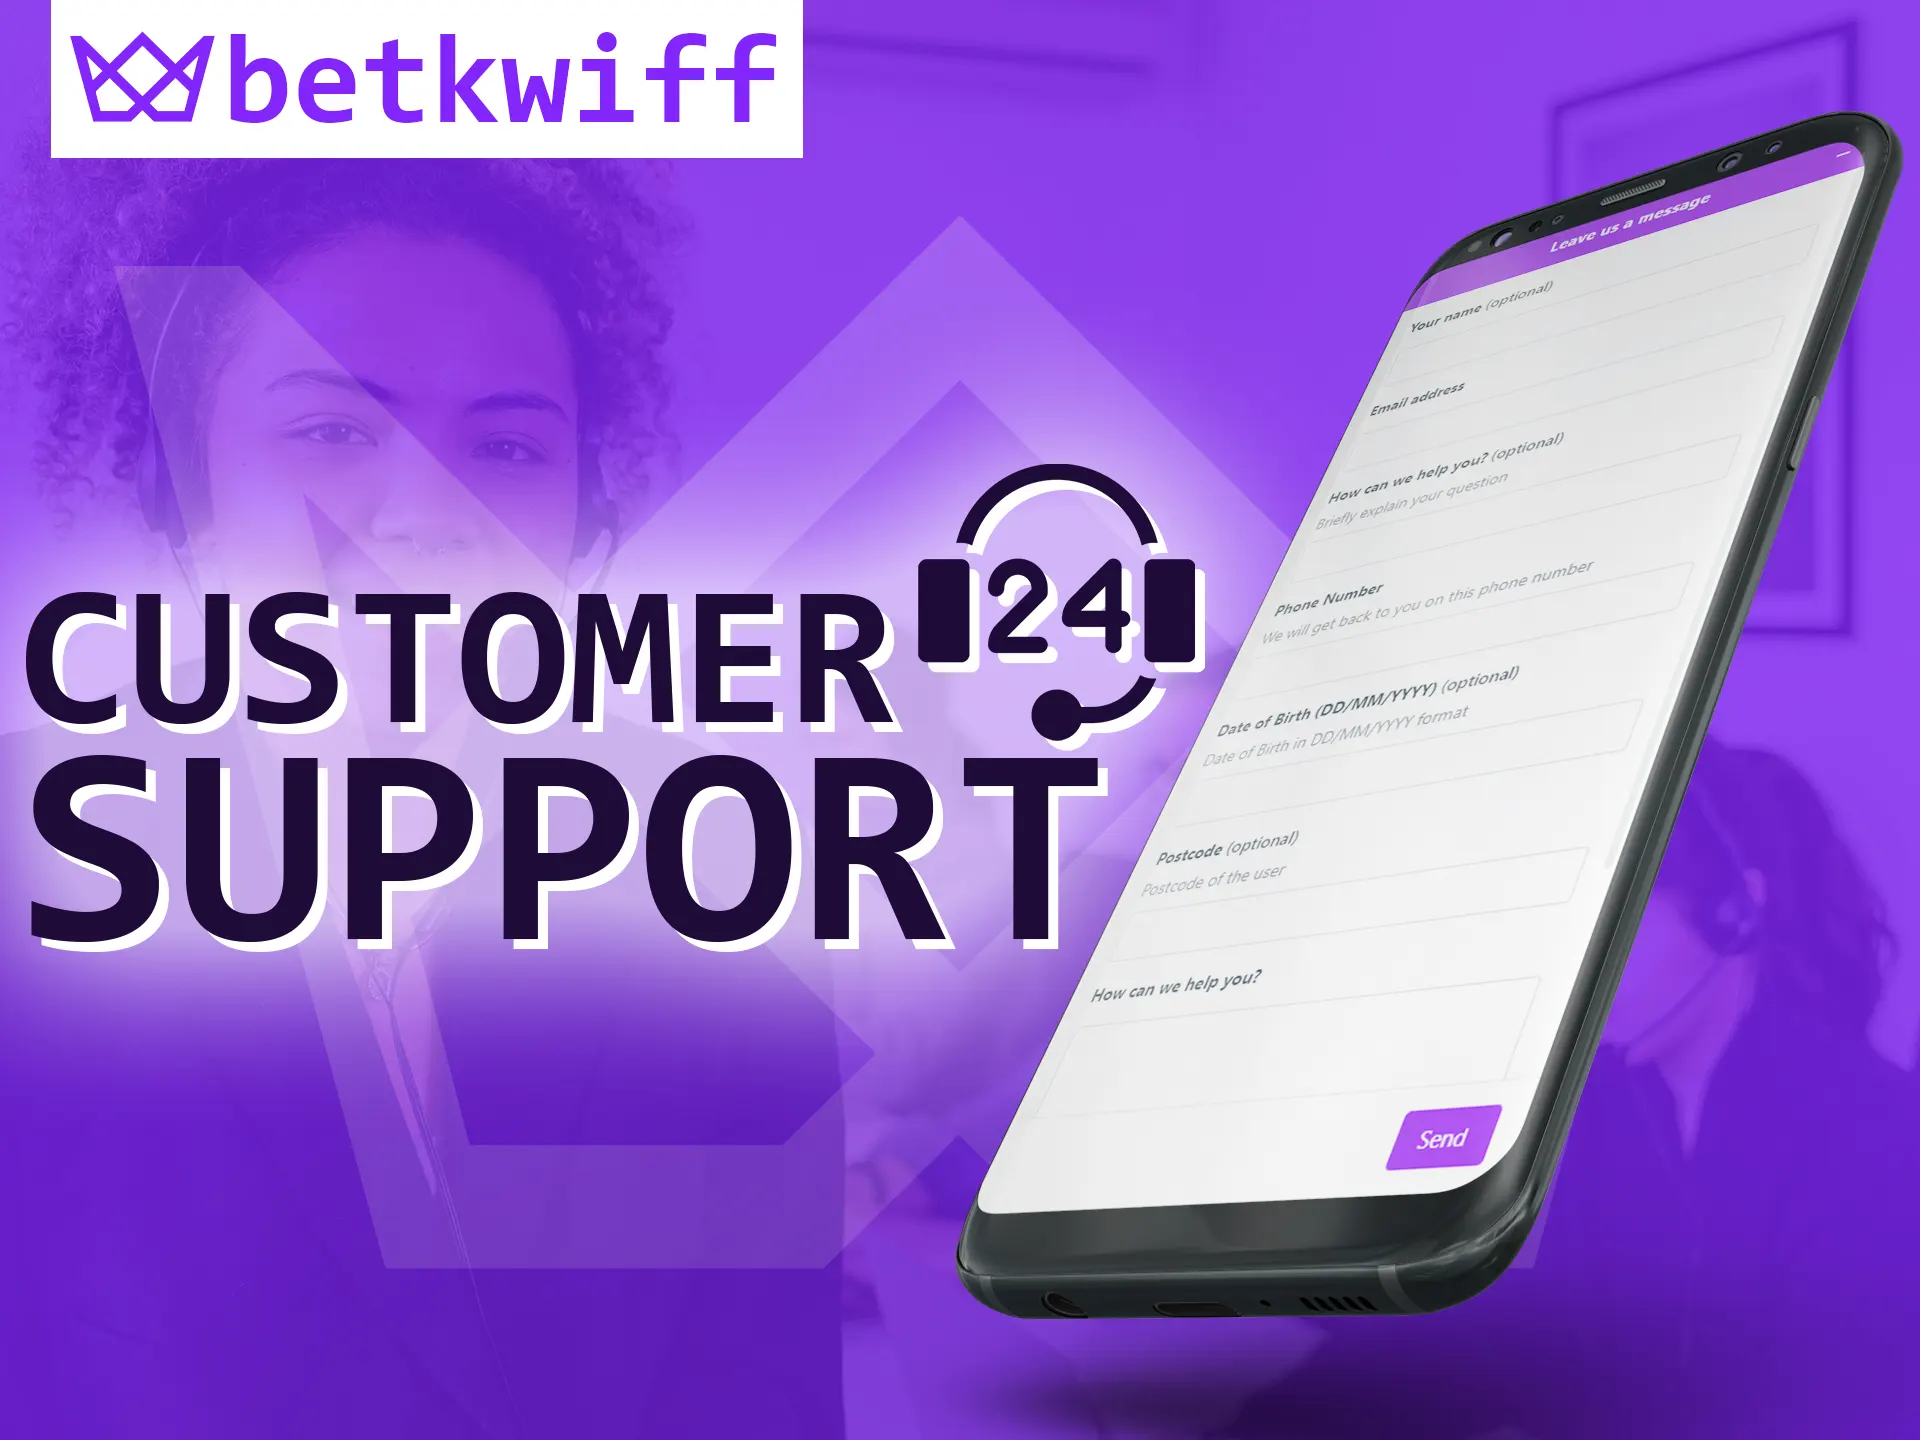 The Betkwiff app provides support for its users.